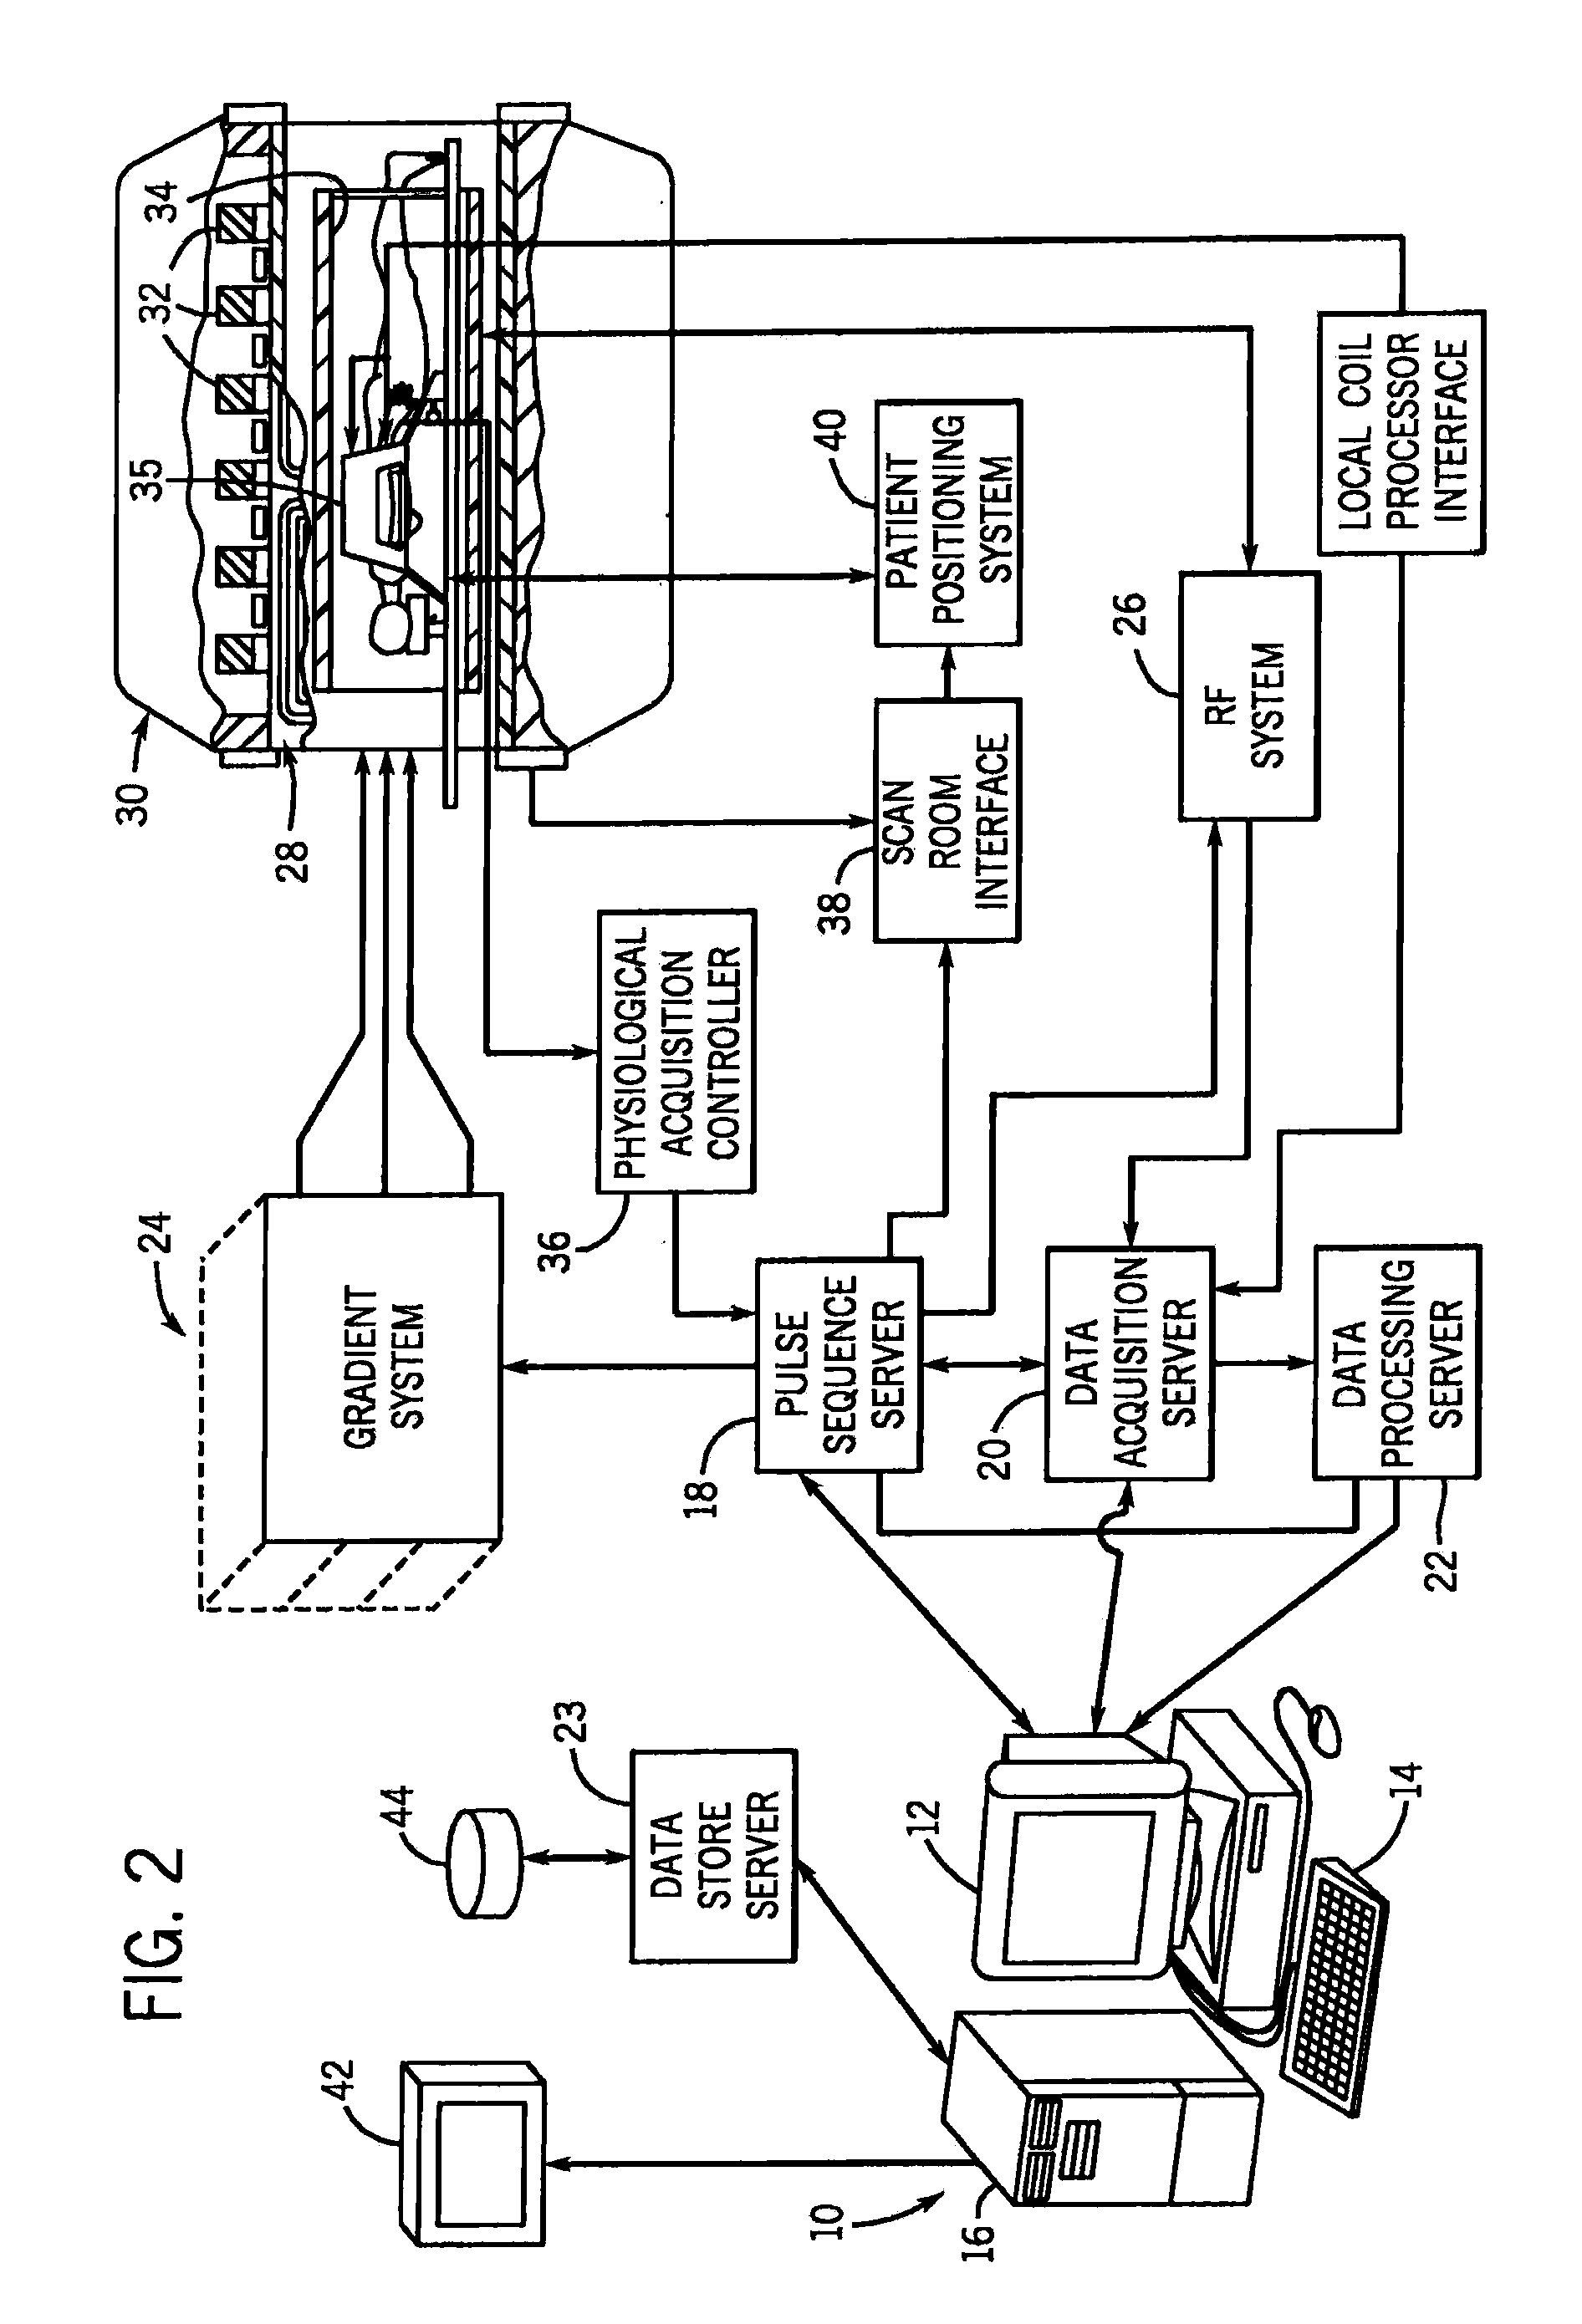 Microcontroller System for Identifying RF Coils in the Bore of a Magnetic Resonance Imaging System